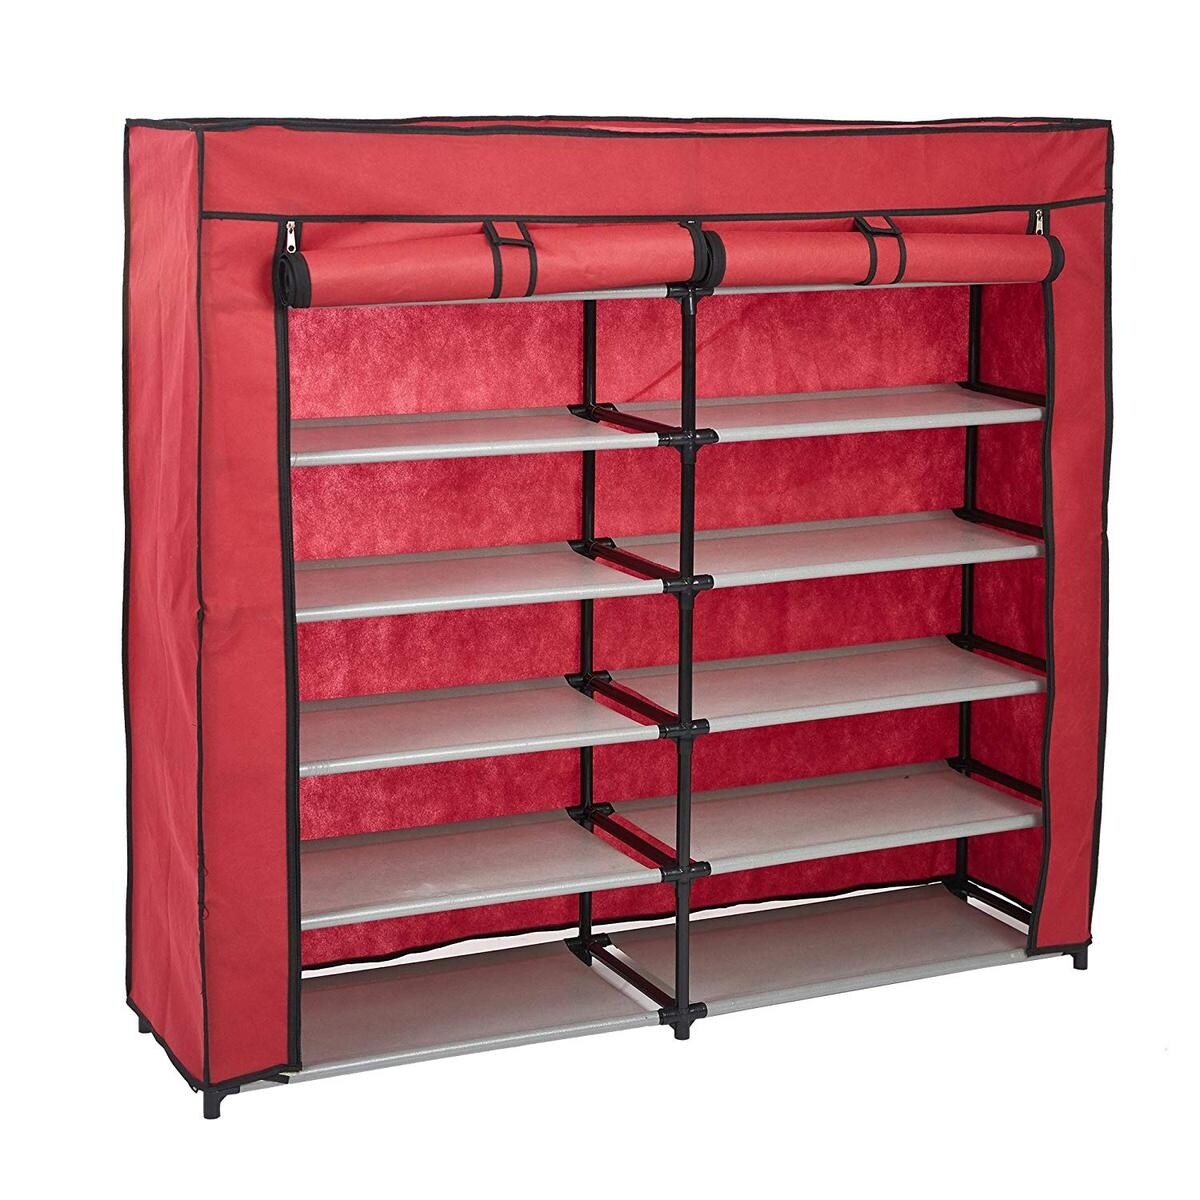 https://ak1.ostkcdn.com/images/products/is/images/direct/73d8da8cbbc2bfc9be292494058d393fe862a245/6-Tier-36-Pair-Shoe-Storage-Organizer-Dustproof-Non-woven-Fabric-Cover.jpg